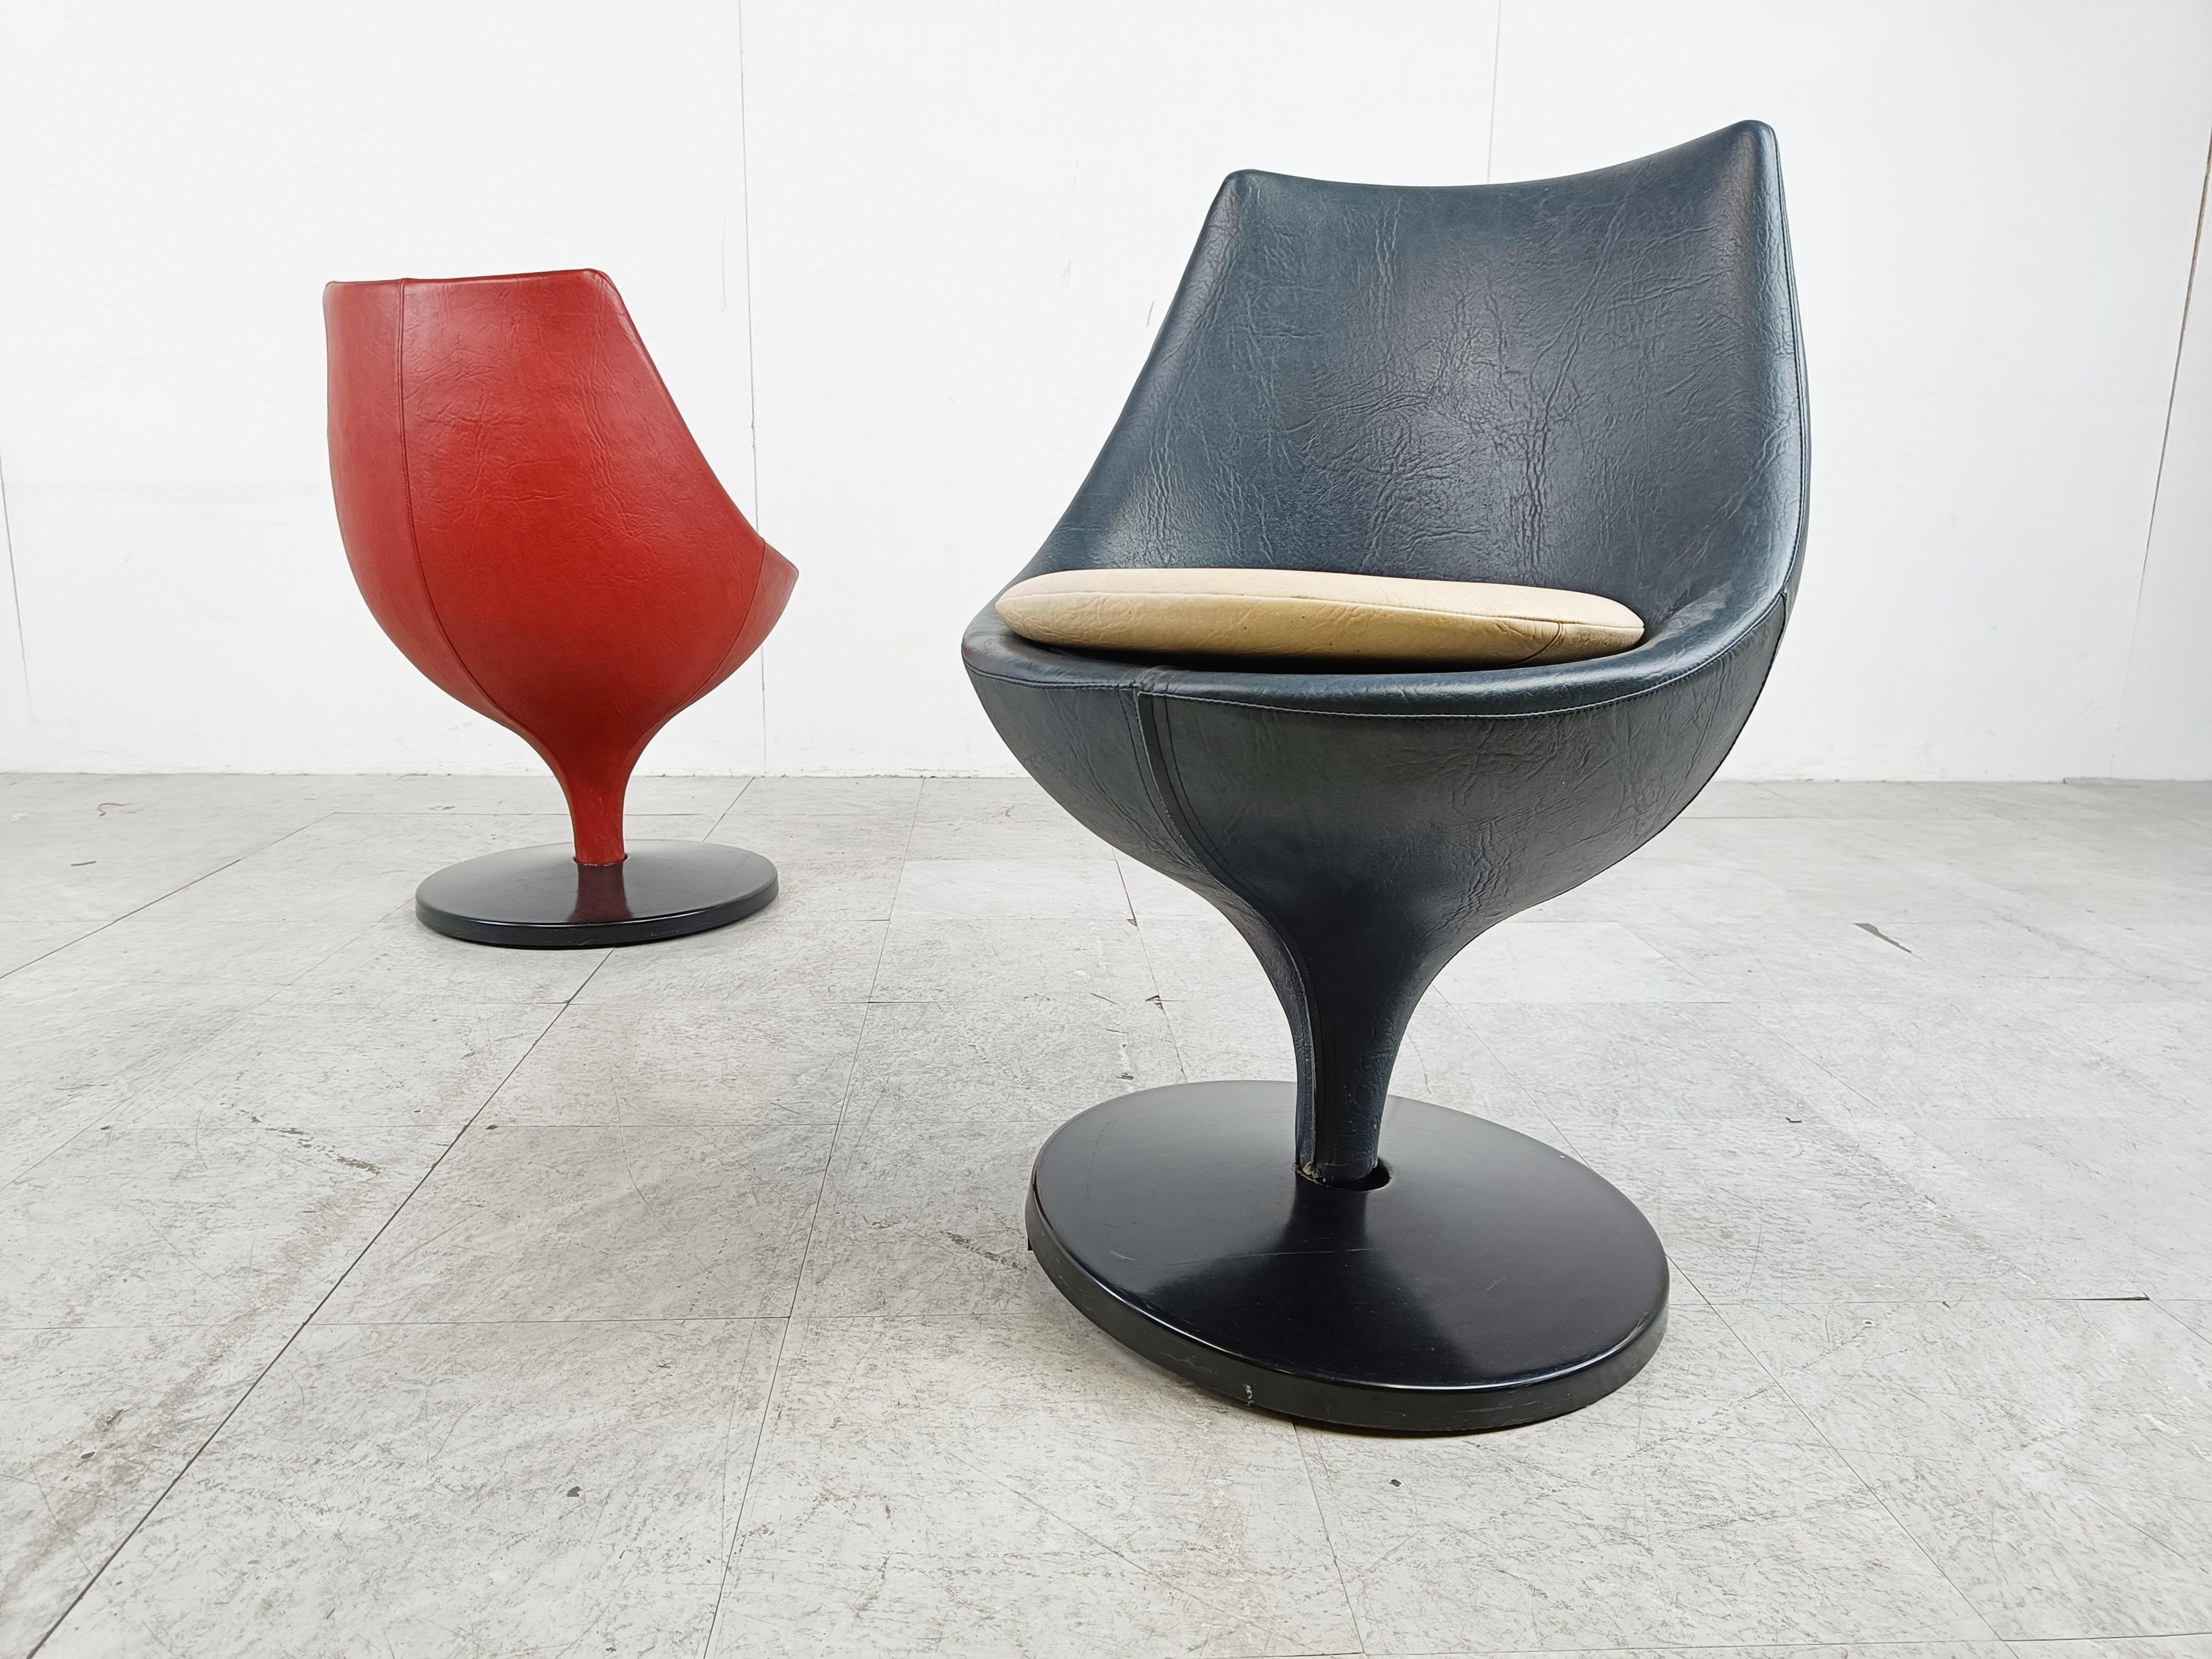 Pair of Polaris Chairs by Pierre Guariche for Meurop, 1960s For Sale 1